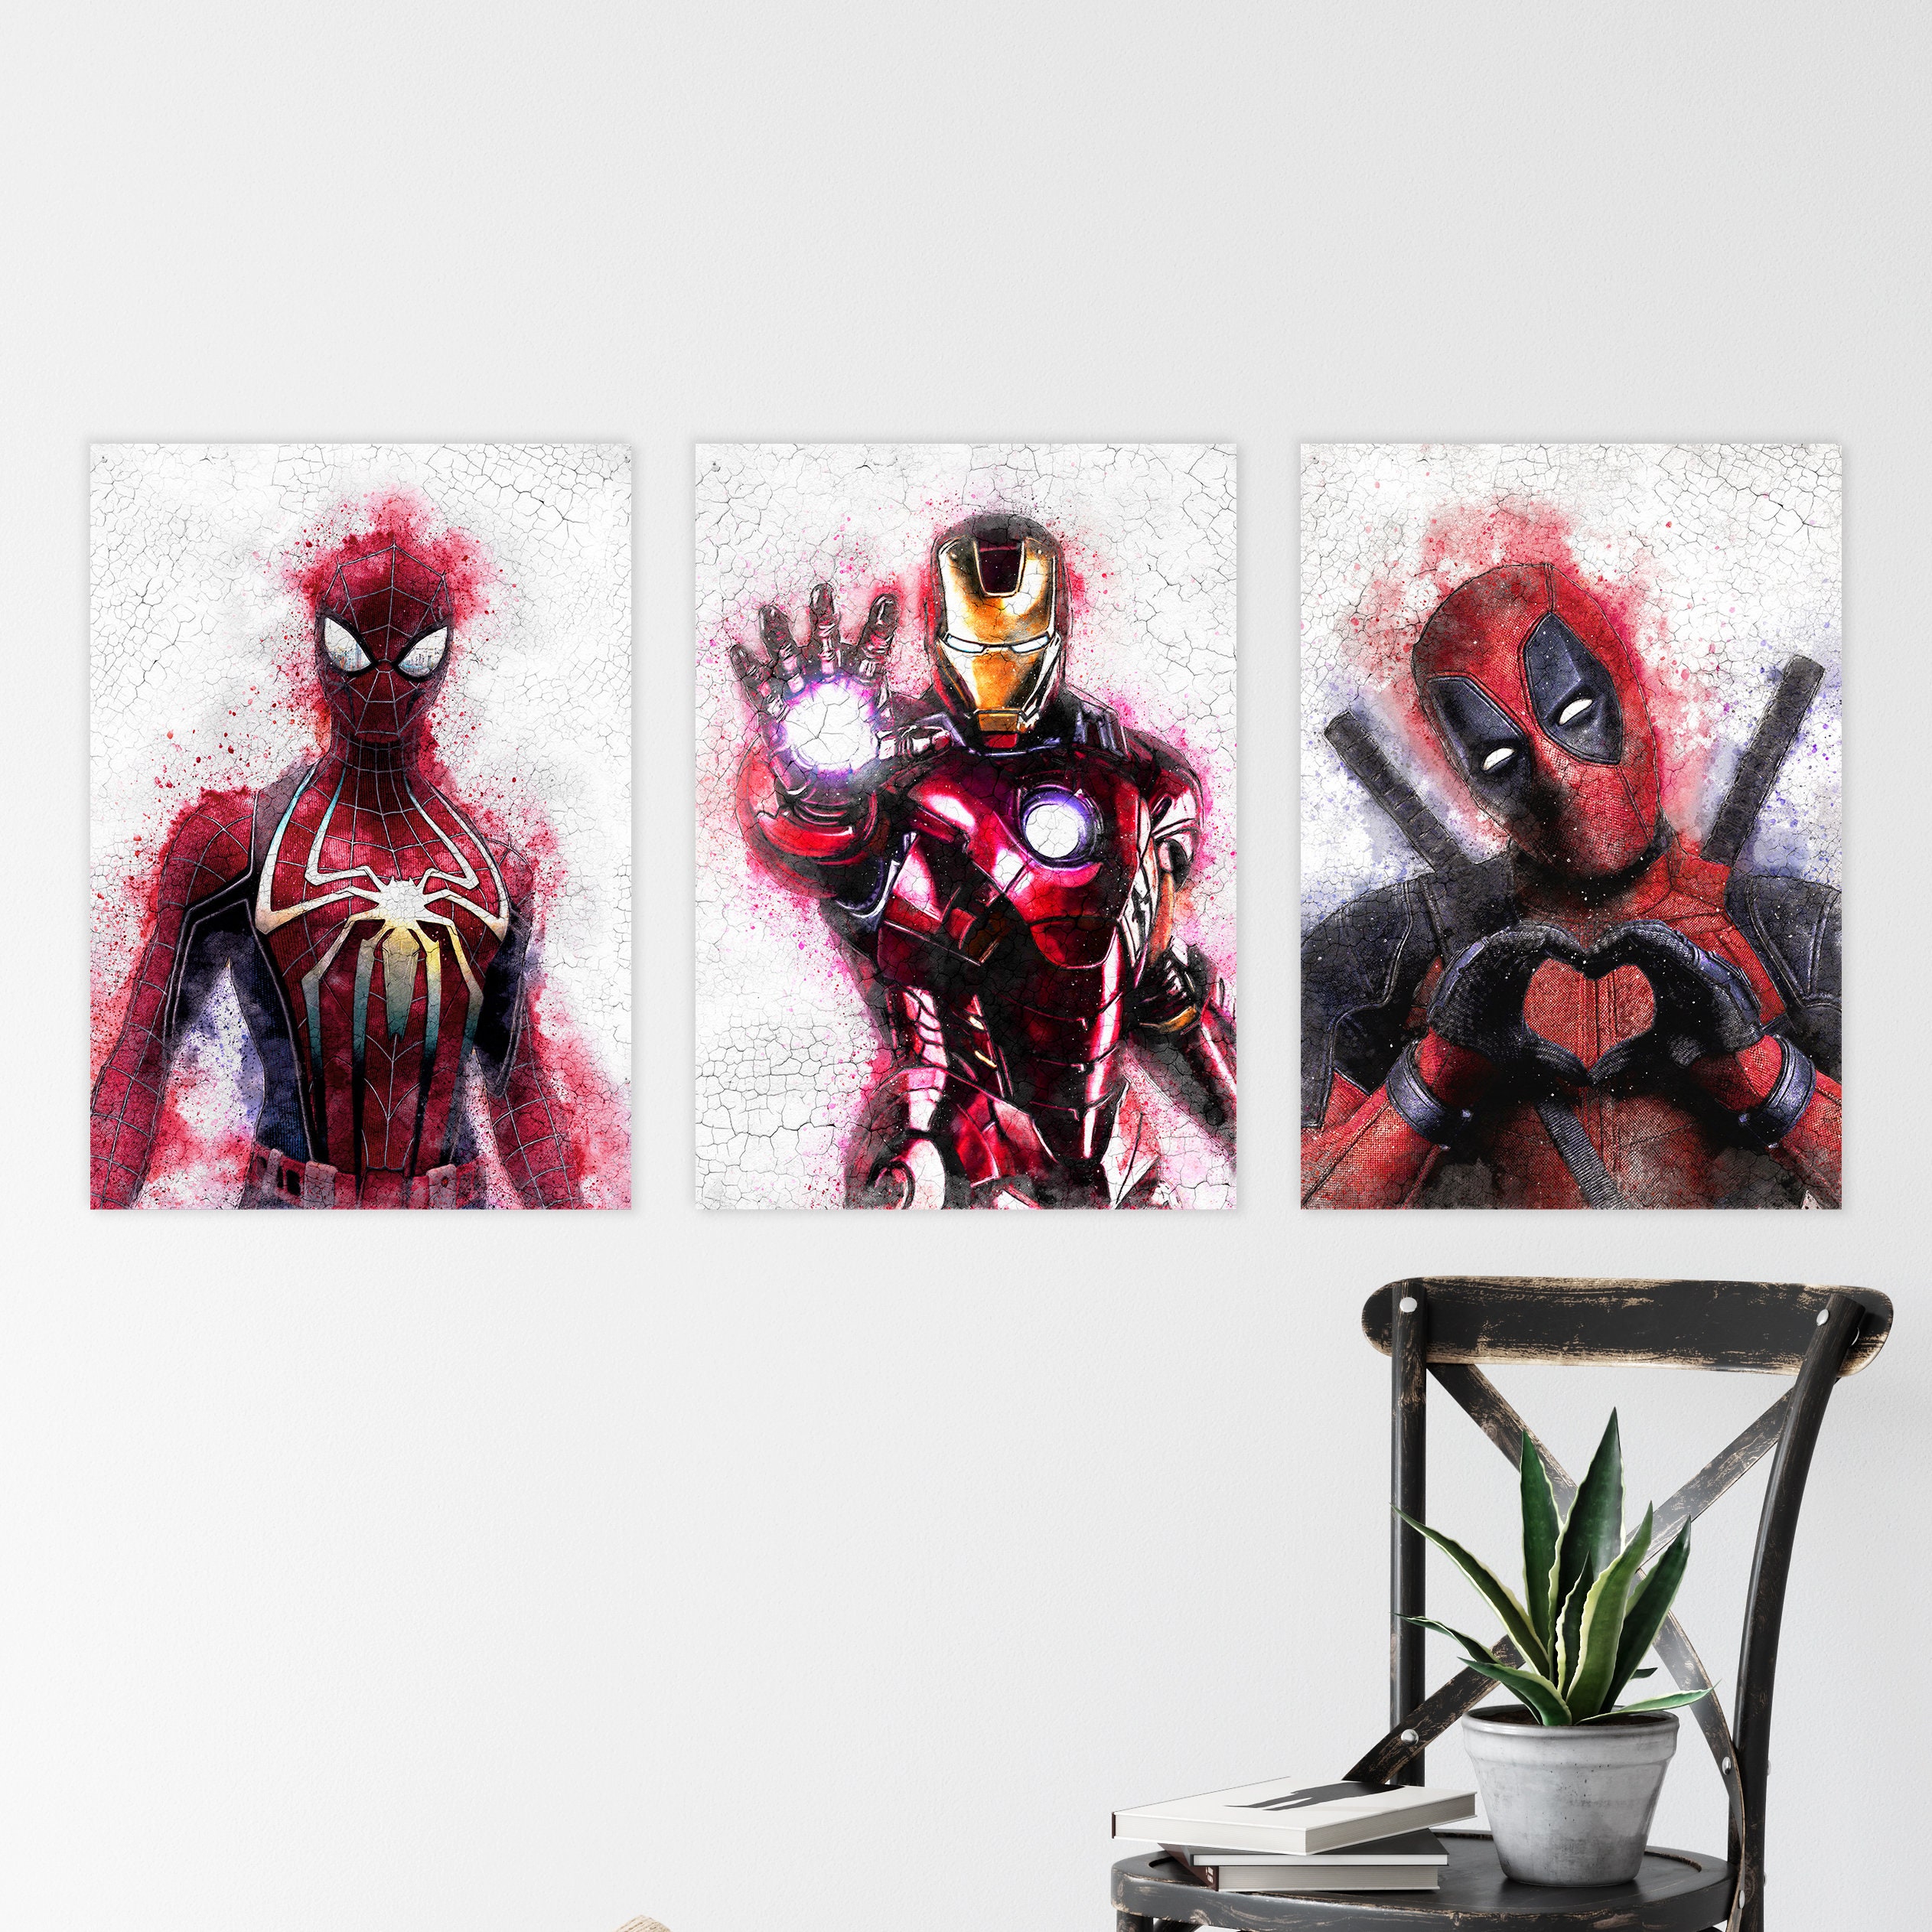 Deadpool 3 - Film Movie Poster - Best Print Art Reproduction Quality Wall  Decoration Gift - A0Canvas (40/30 inch) - (102/76 cm) - Stretched, Ready to